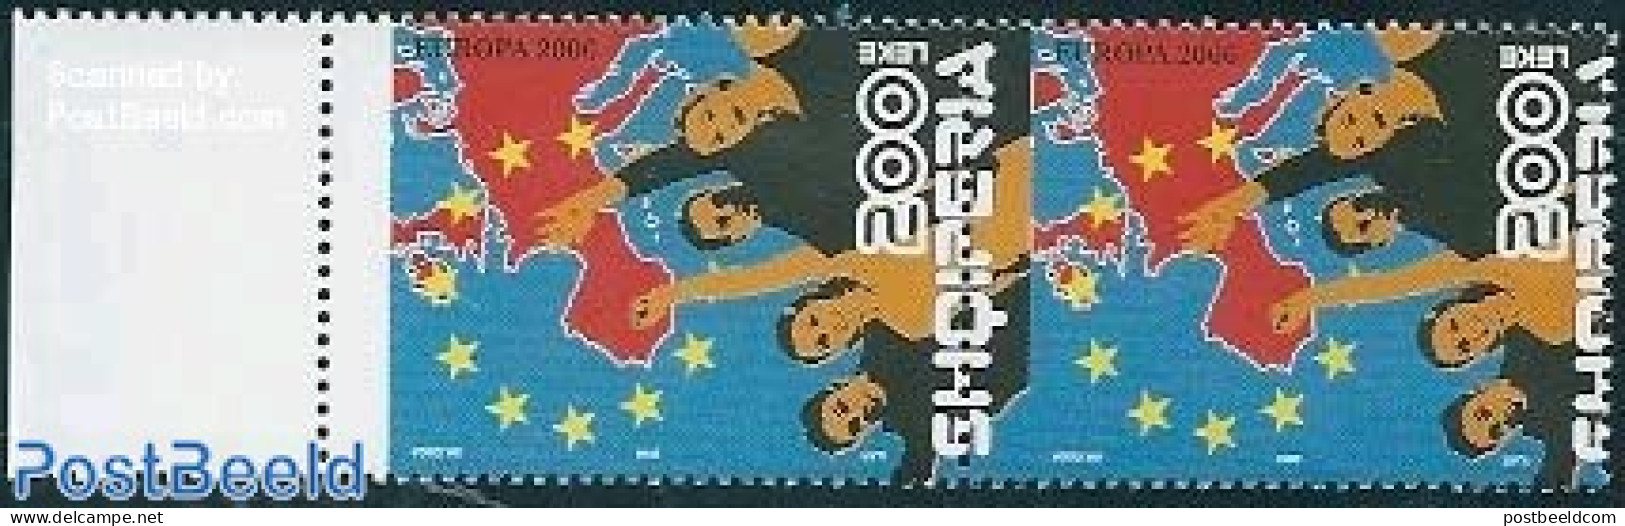 Albania 2006 Europa Pair Of 200L, Moved Perforation, Mint NH, History - Various - Europa (cept) - Errors, Misprints, P.. - Fouten Op Zegels